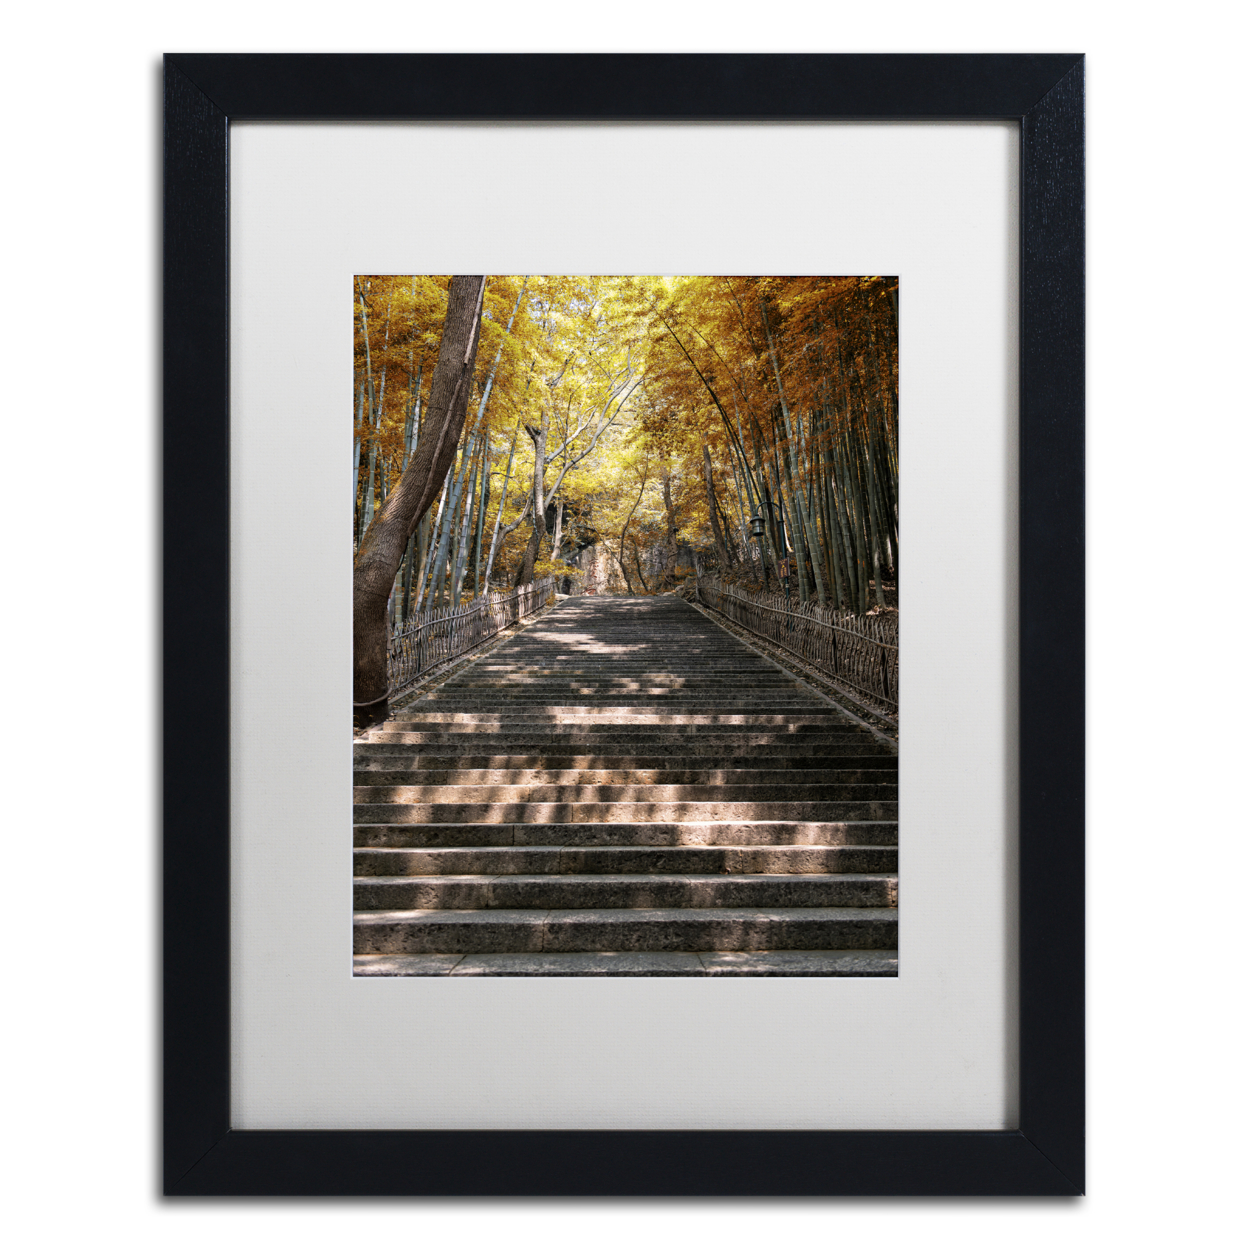 Philippe Hugonnard 'Autumn Stairs' Black Wooden Framed Art 18 X 22 Inches